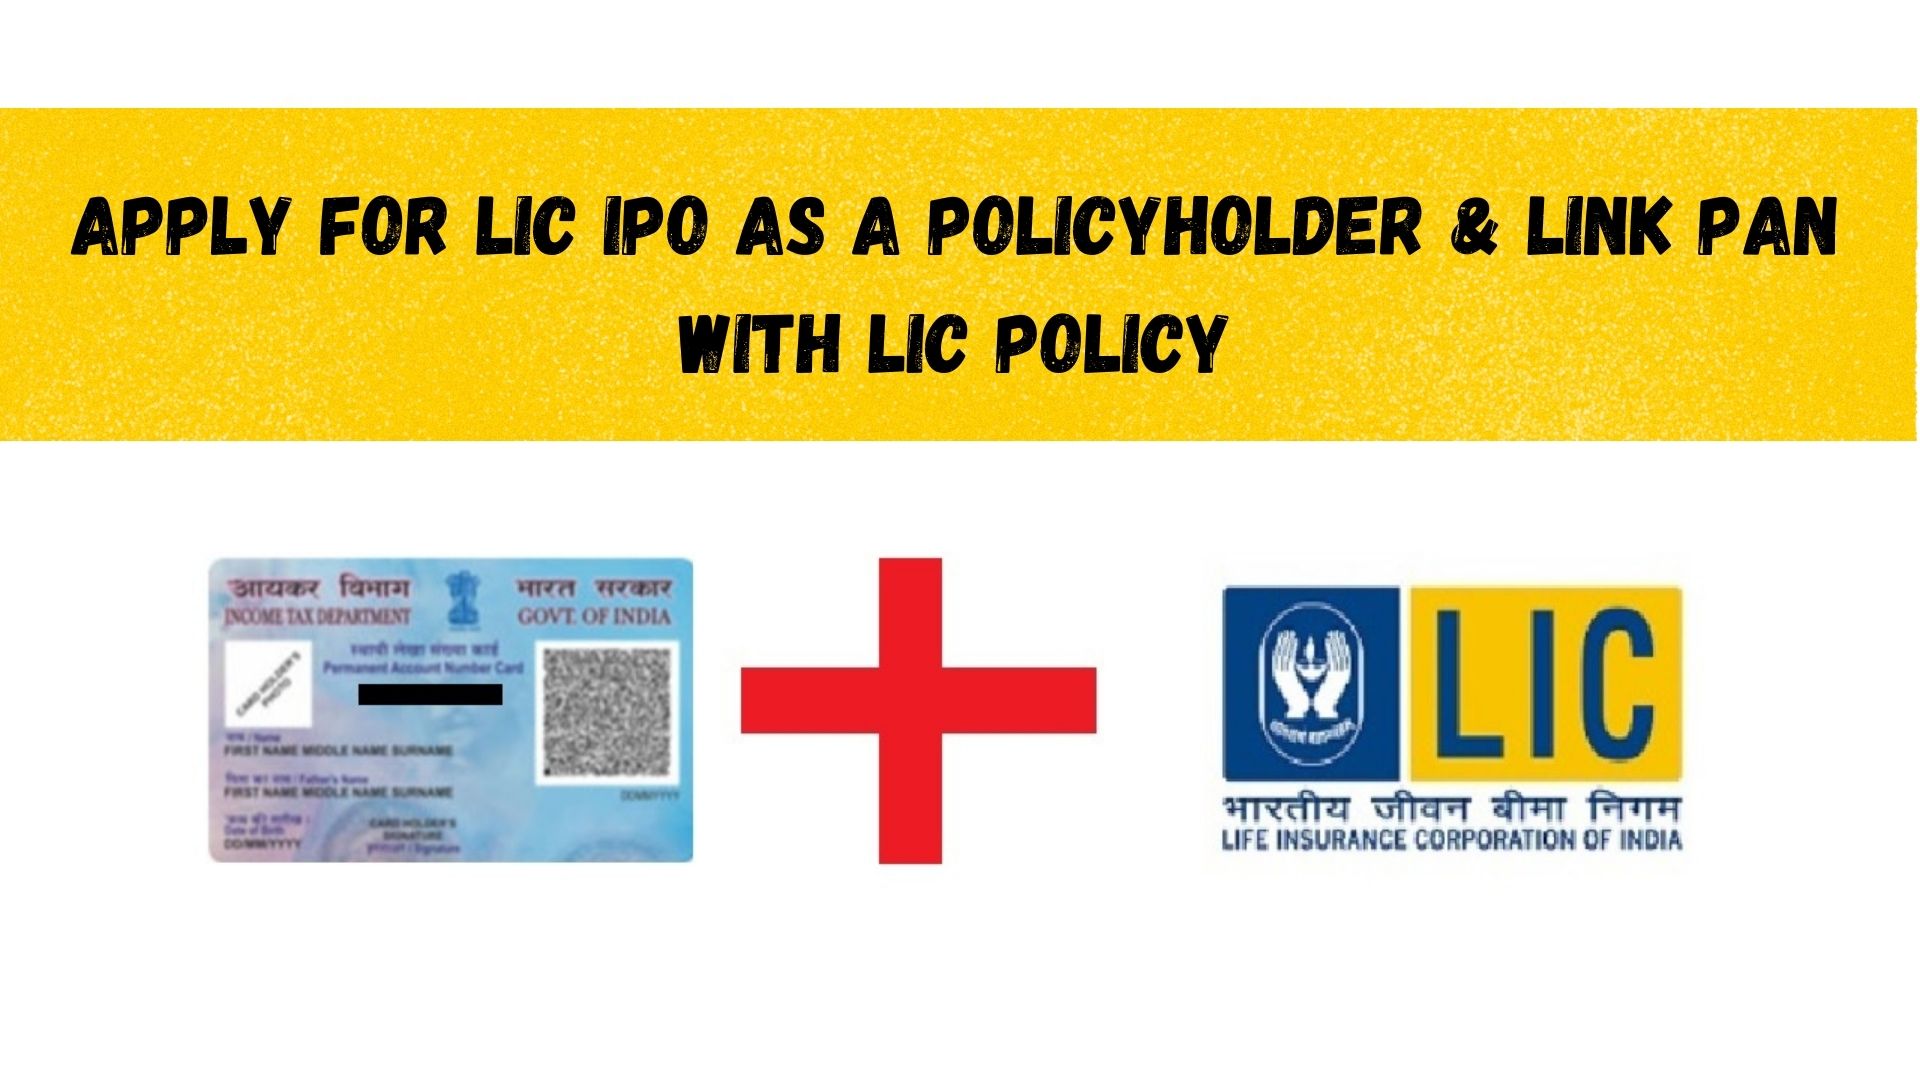 How to Apply for LIC IPO as a Policyholder